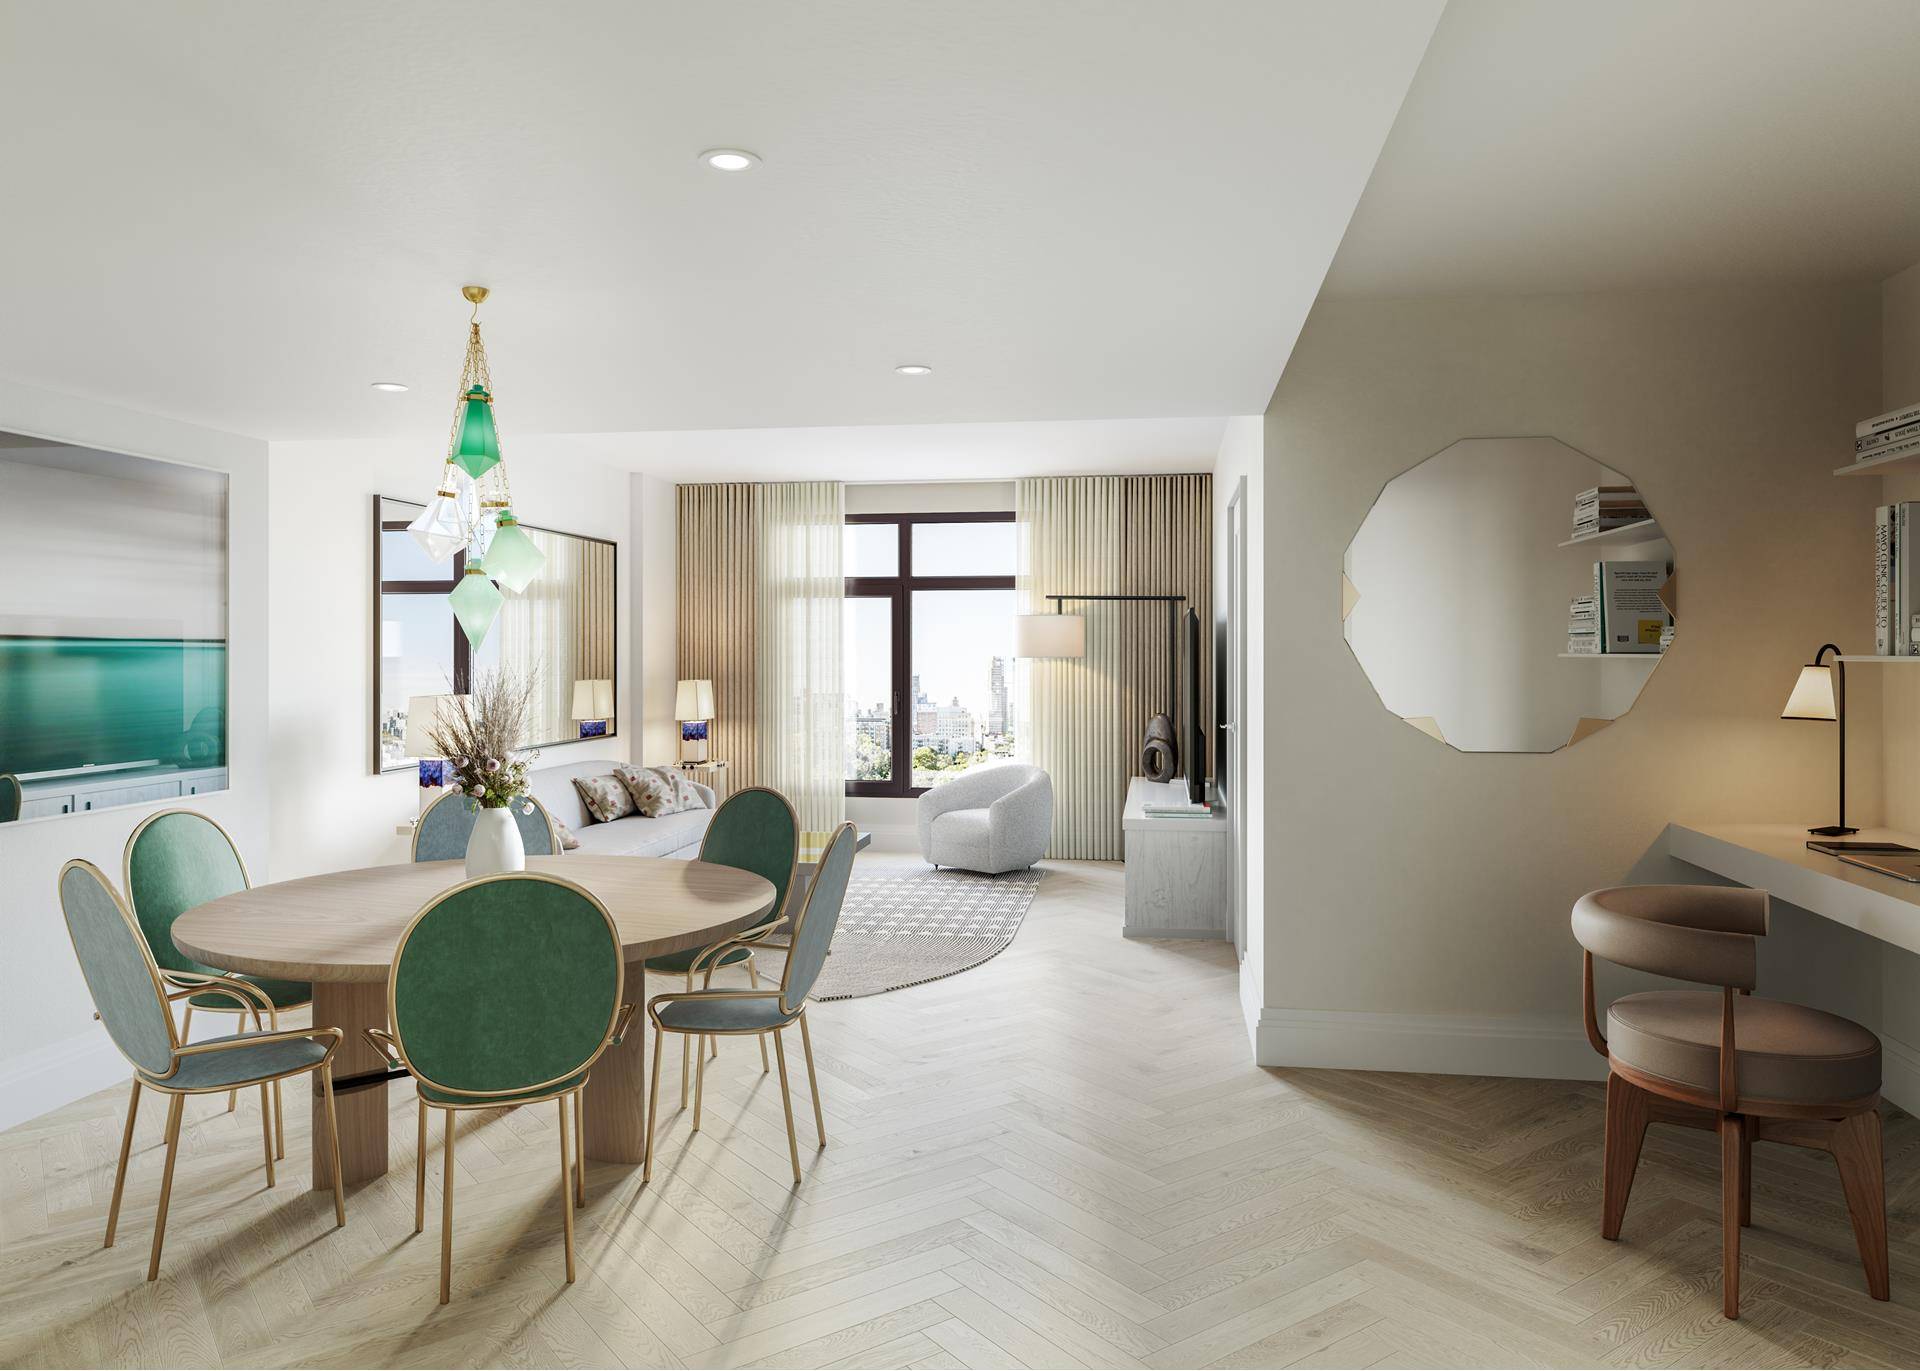 Sales Gallery Now Open By Appointment Introducing residence 9D at 300 West, an east facing studio offering an open concept living area that boasts custom White Oak herringbone flooring, central ...